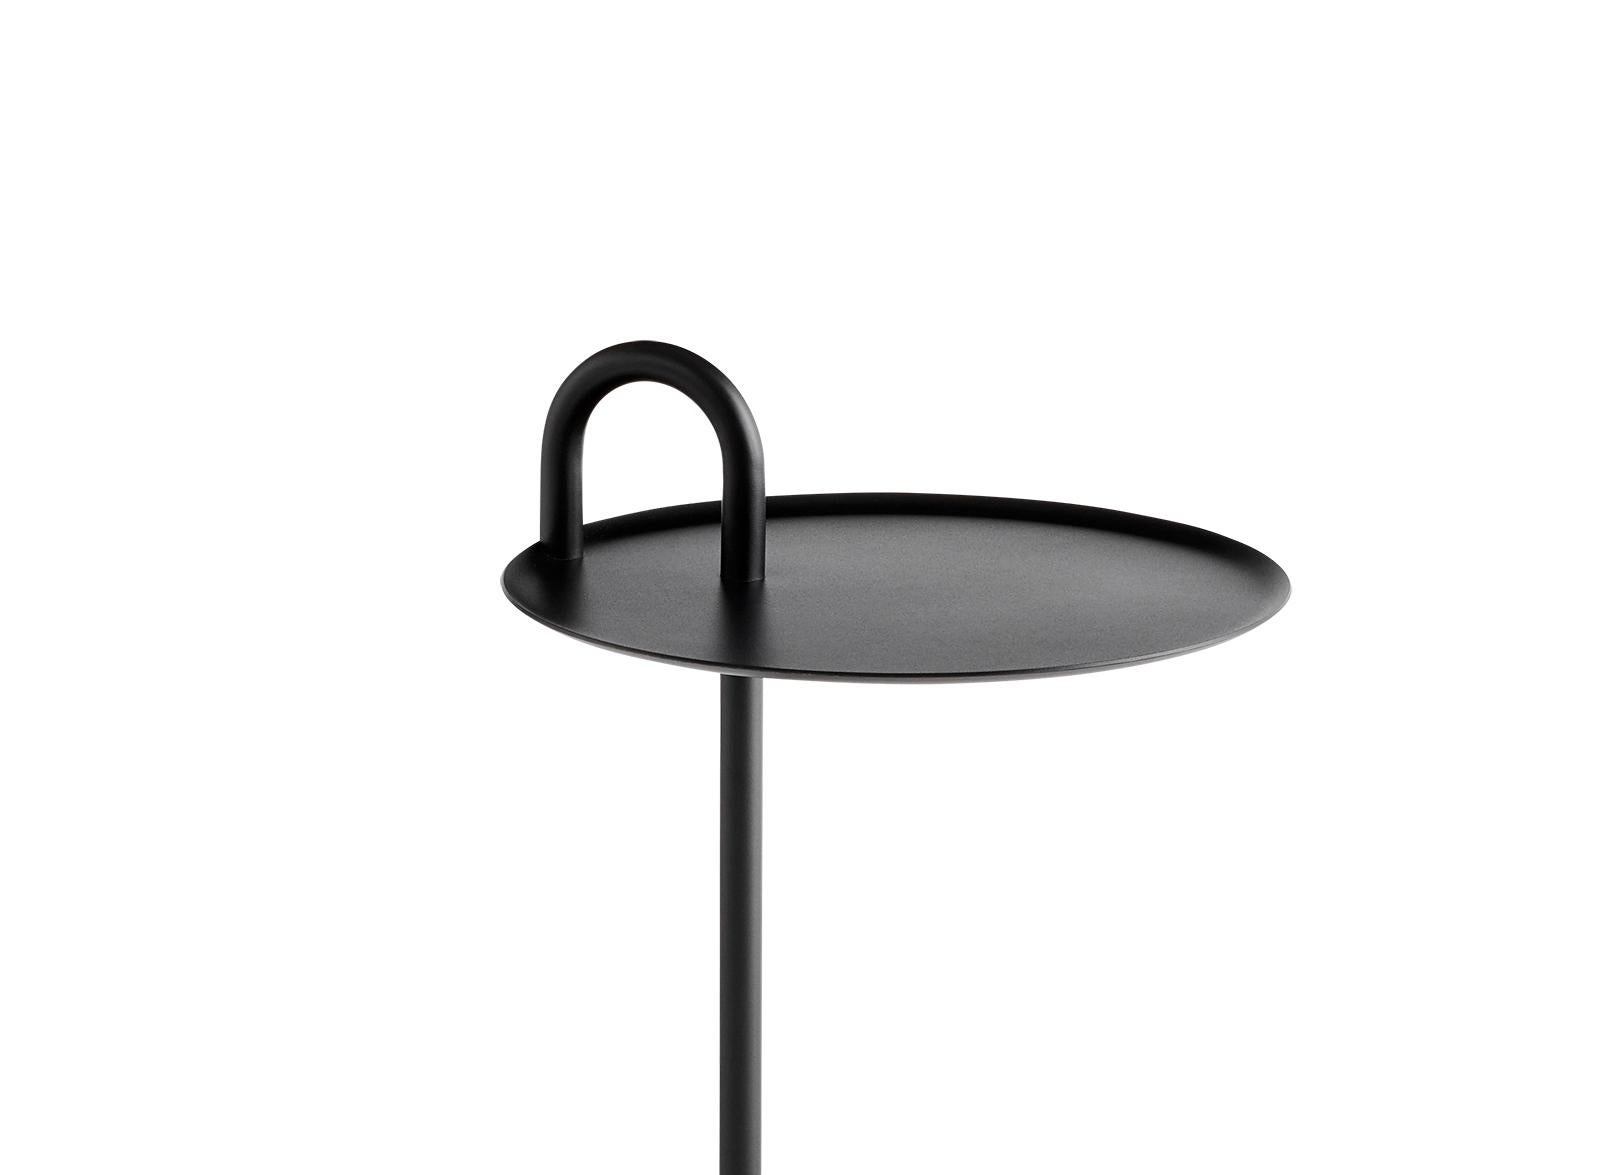 Shane Schneck’s bowler table is a compact side table that is ideal for small spaces. The single tube that extends upwards
creates a defined profile, which doubles as a functional handle too. The stem, handle and tray are made in powder coated